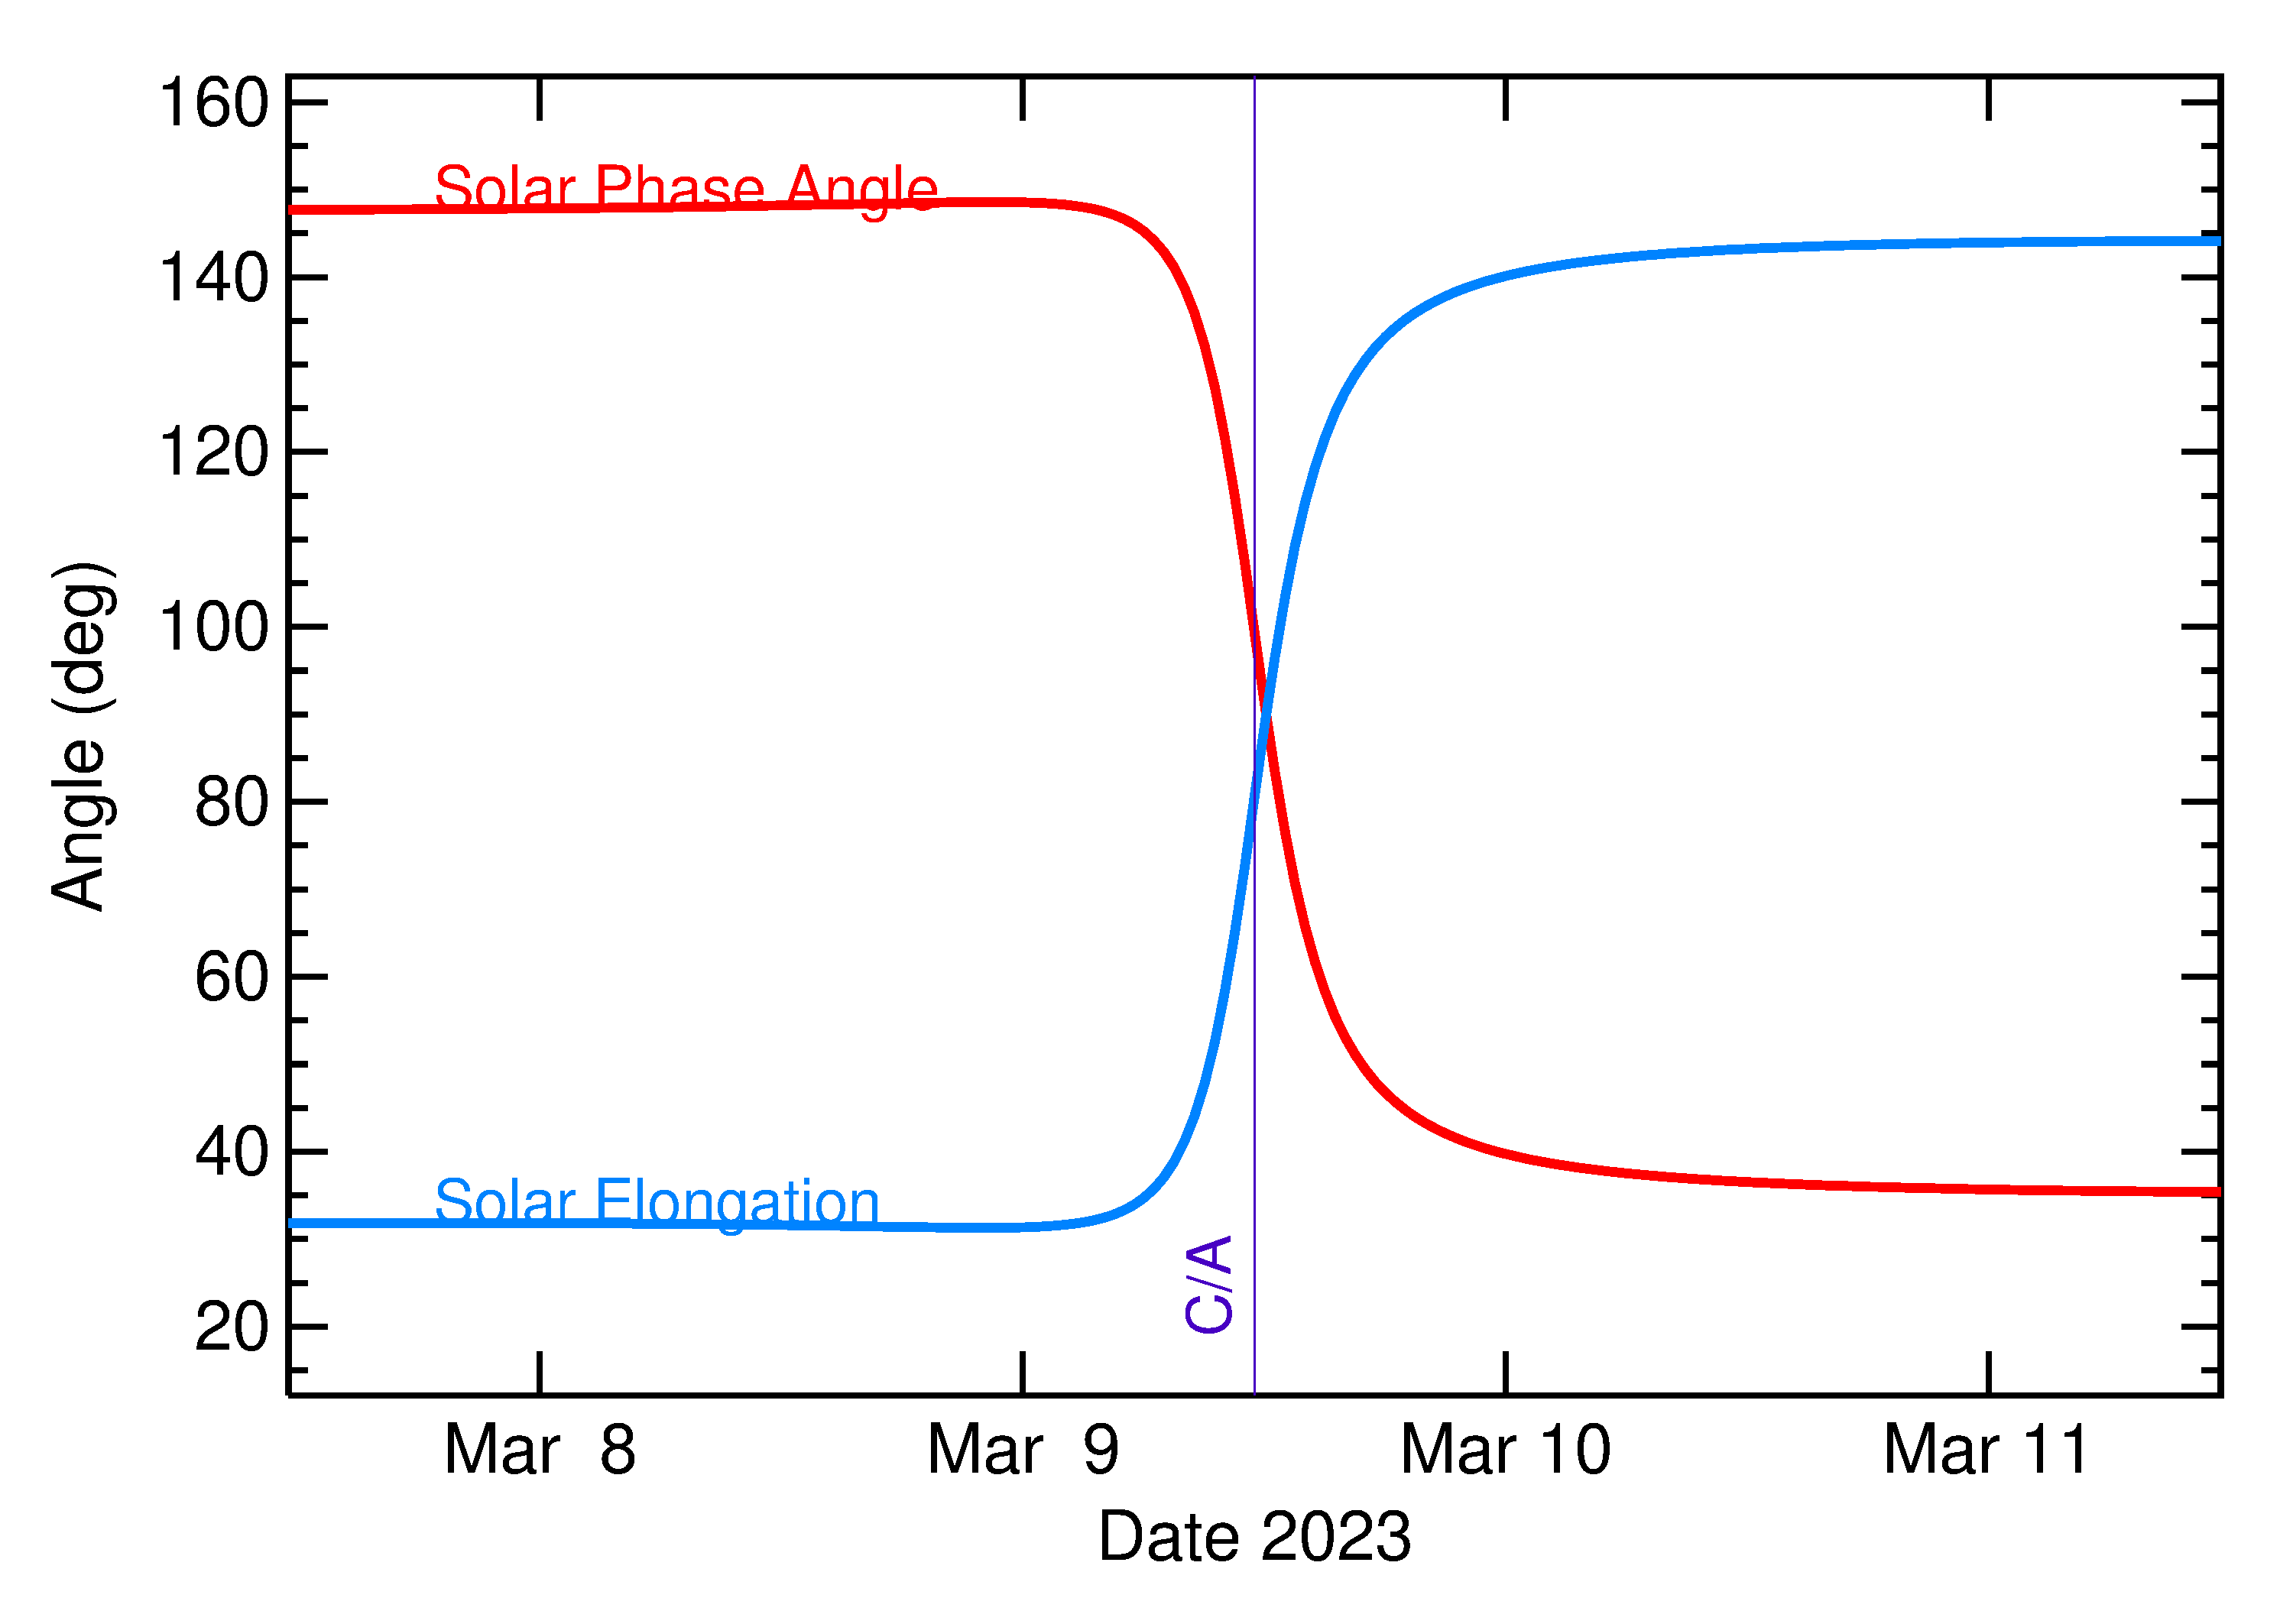 Solar Elongation and Solar Phase Angle of 2023 EN in the days around closest approach